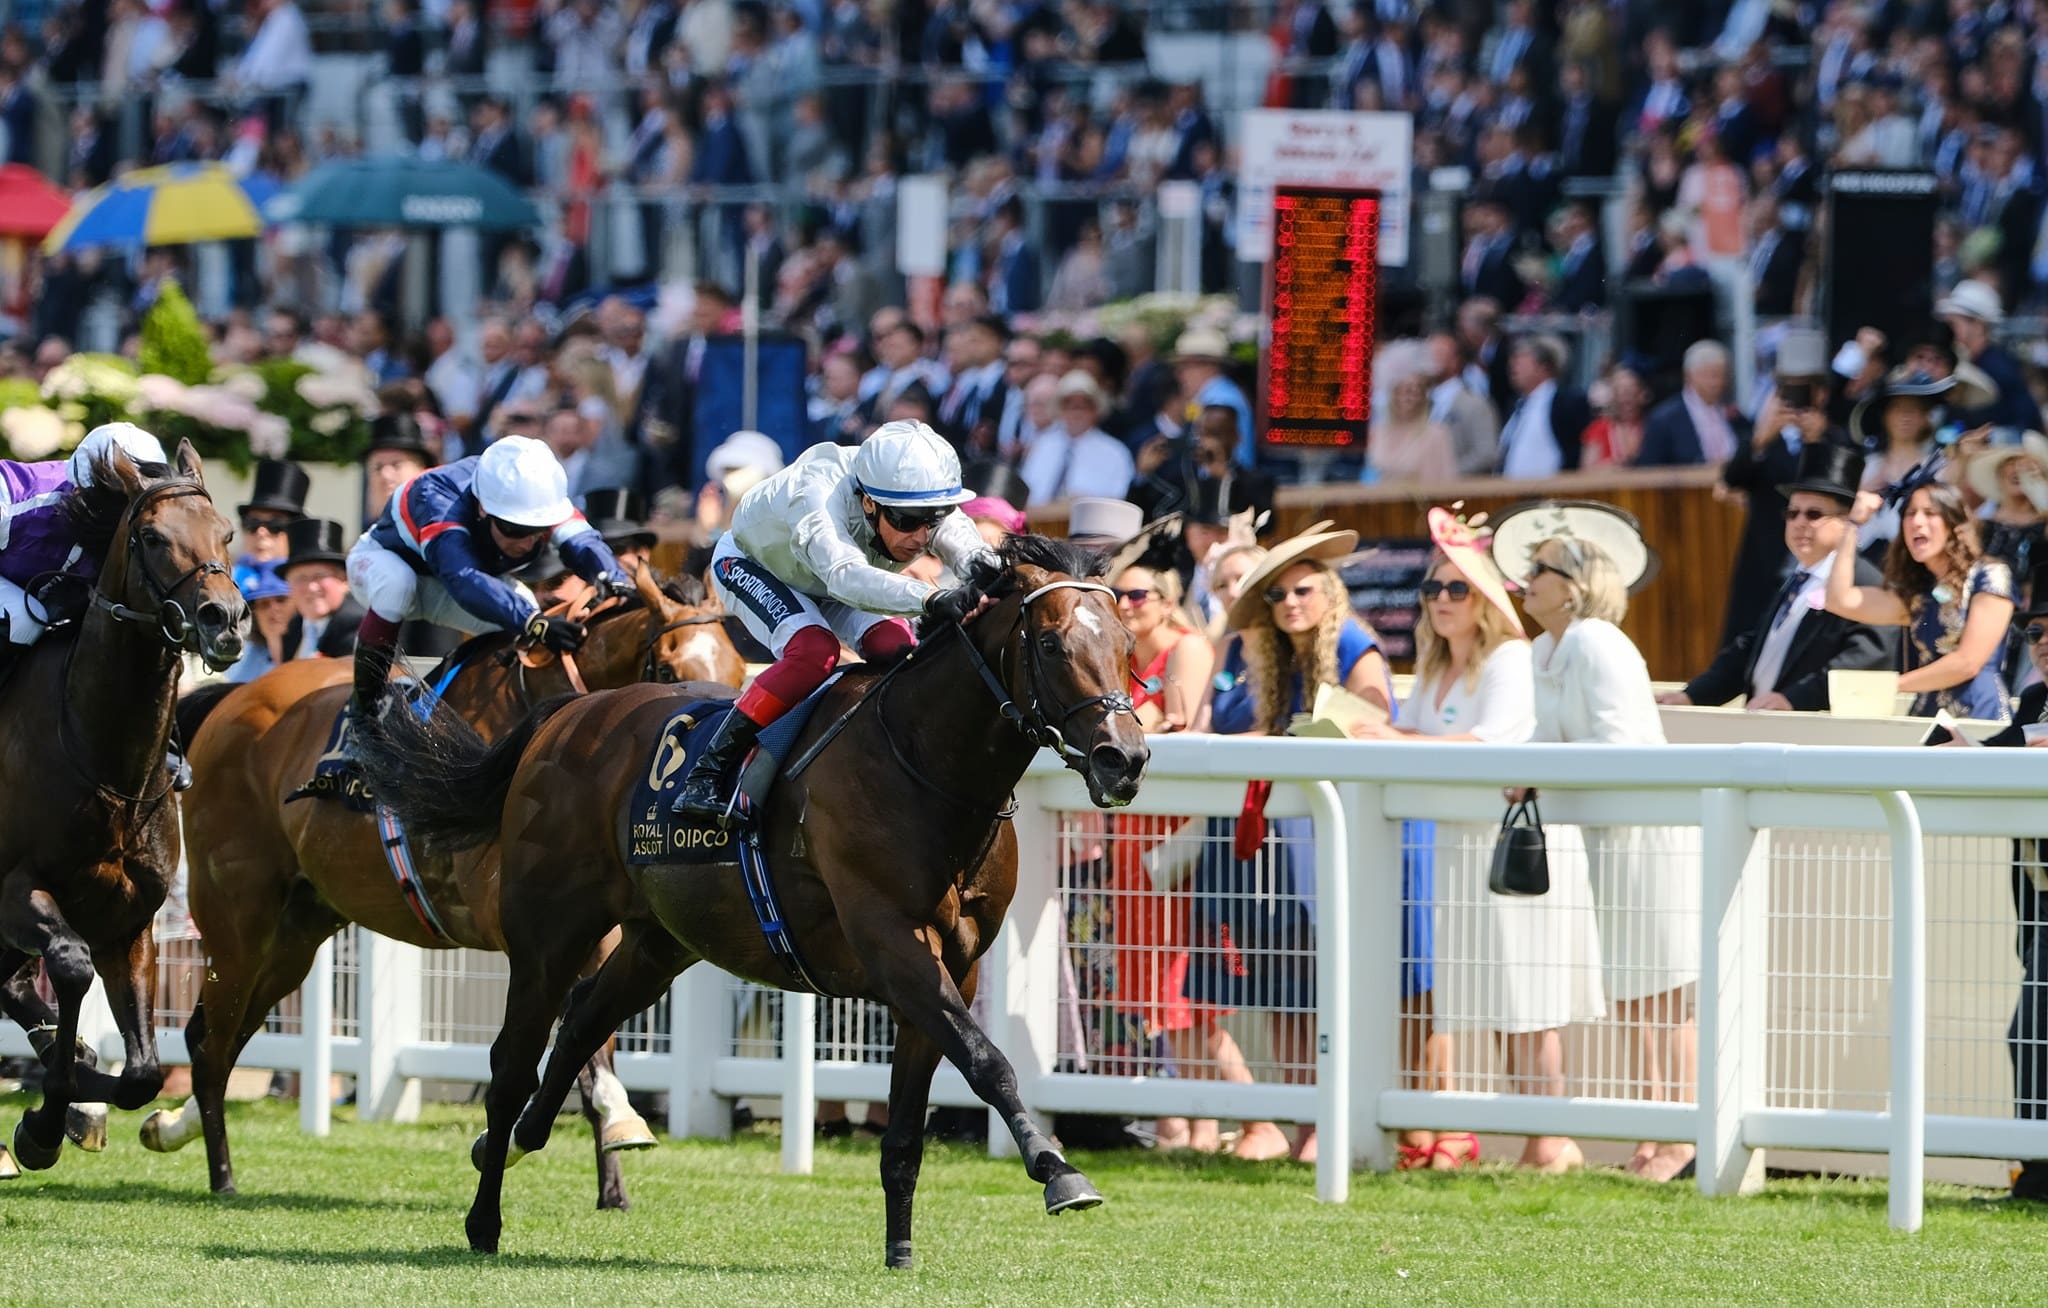 Exciting Opening Day of Royal Ascot With a Number of Impressive Winners to Take Away